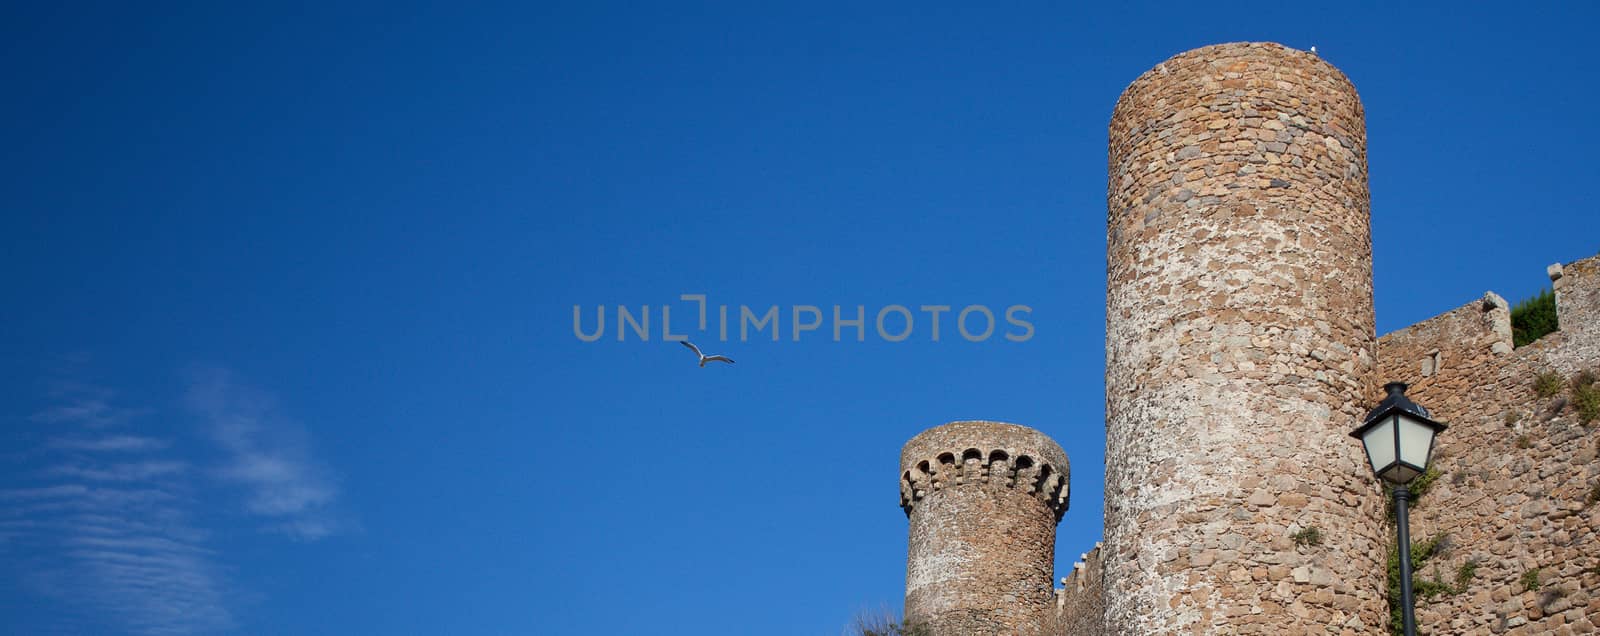 fragment of an ancient fortress on a background of blue sky with birds